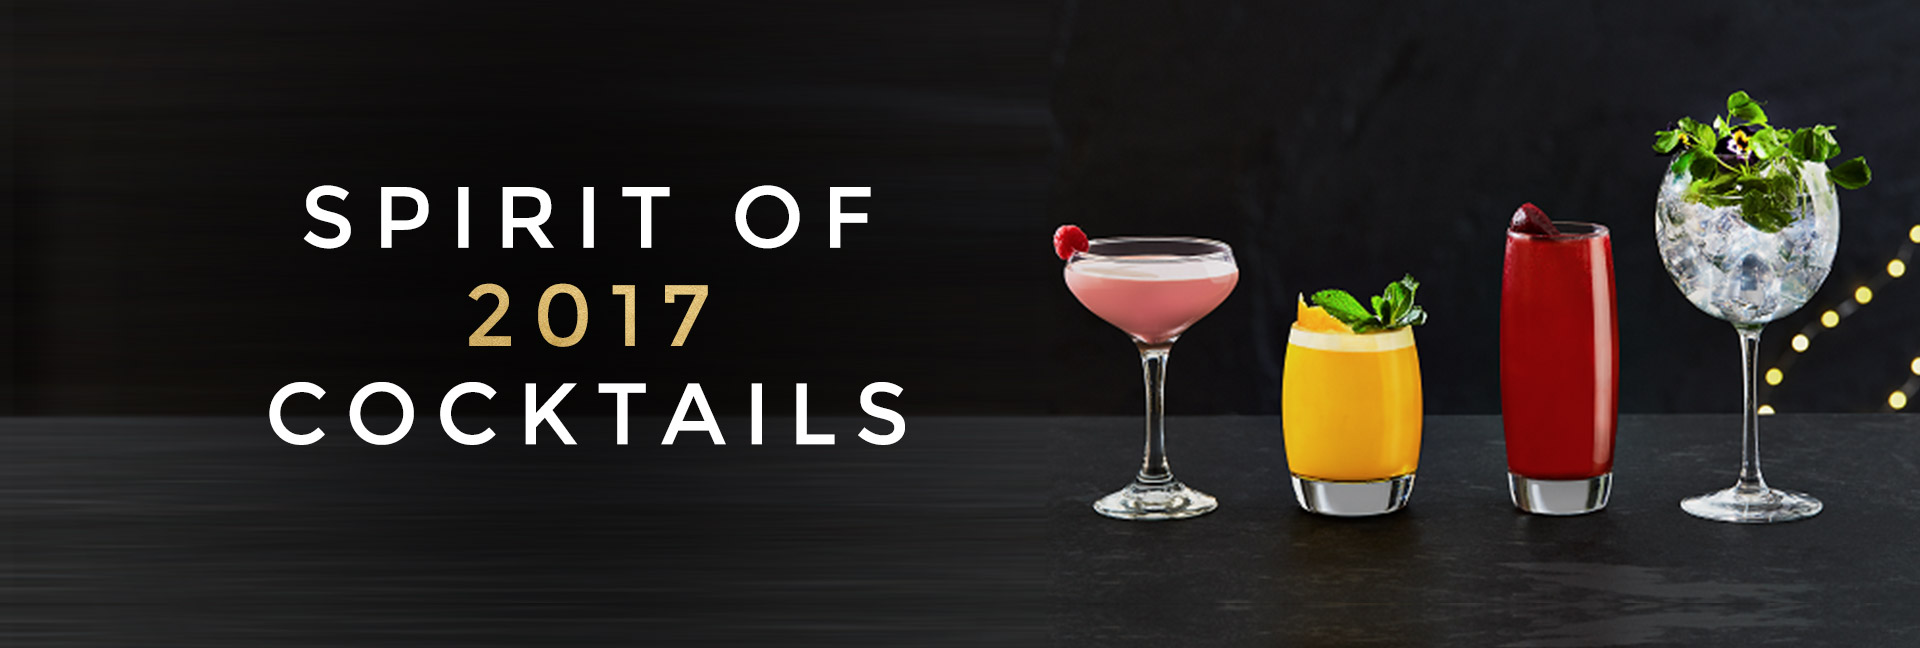 Spirit of 2017 cocktails at All Bar One New Street Station